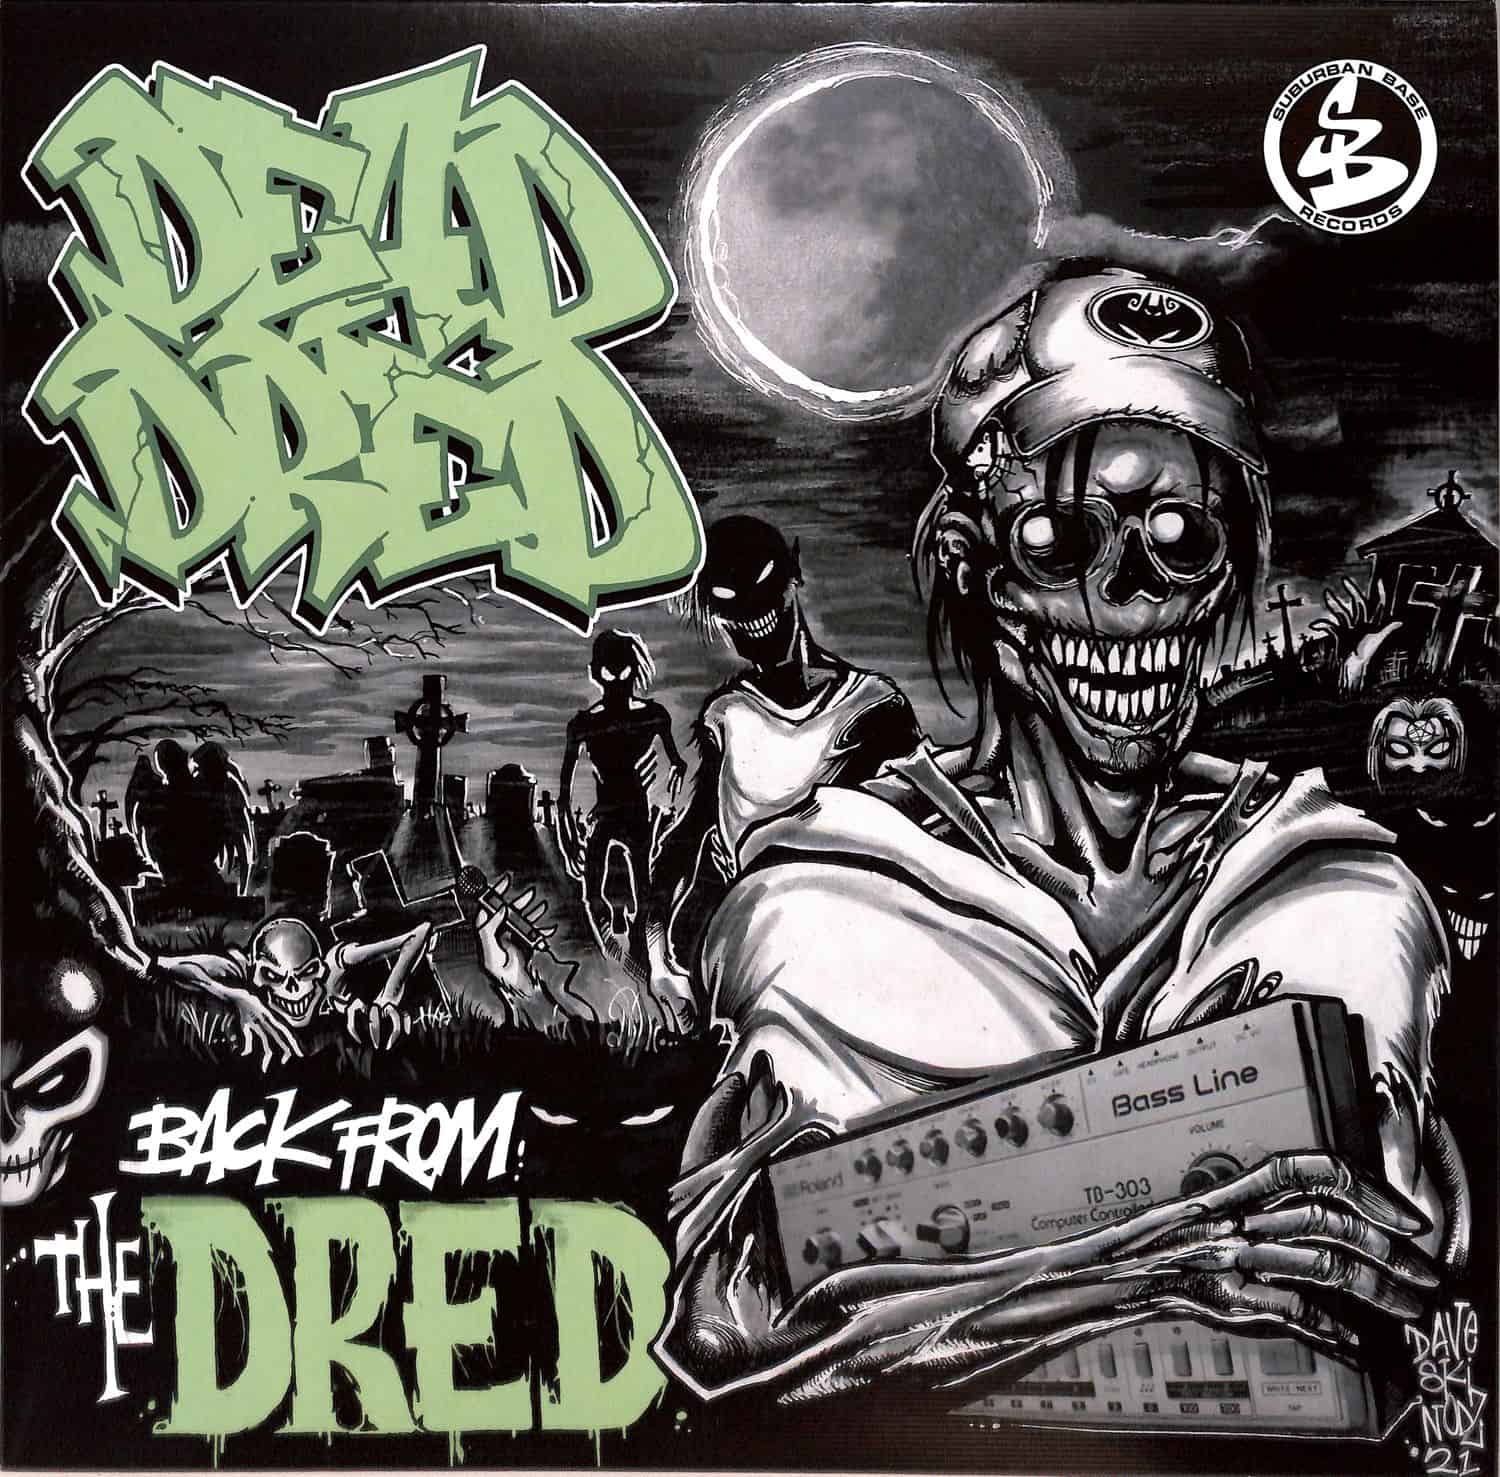 Dead Dred - BACK FROM THE DRED 